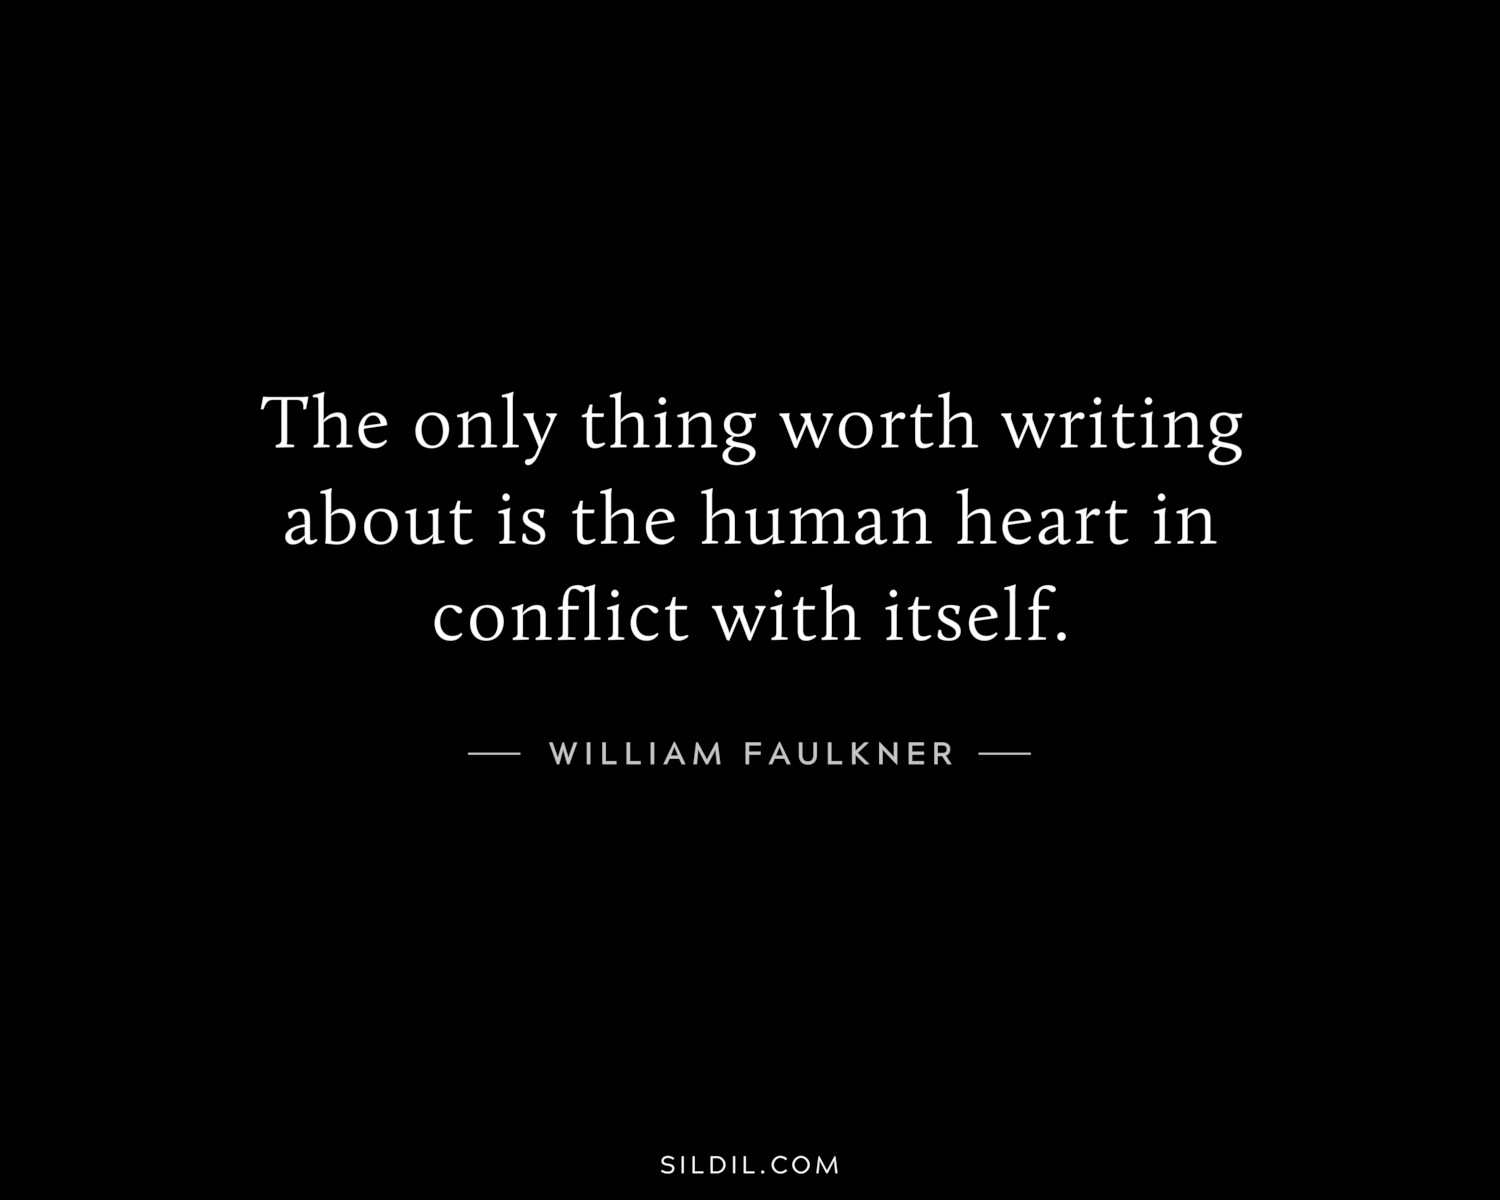 The only thing worth writing about is the human heart in conflict with itself.